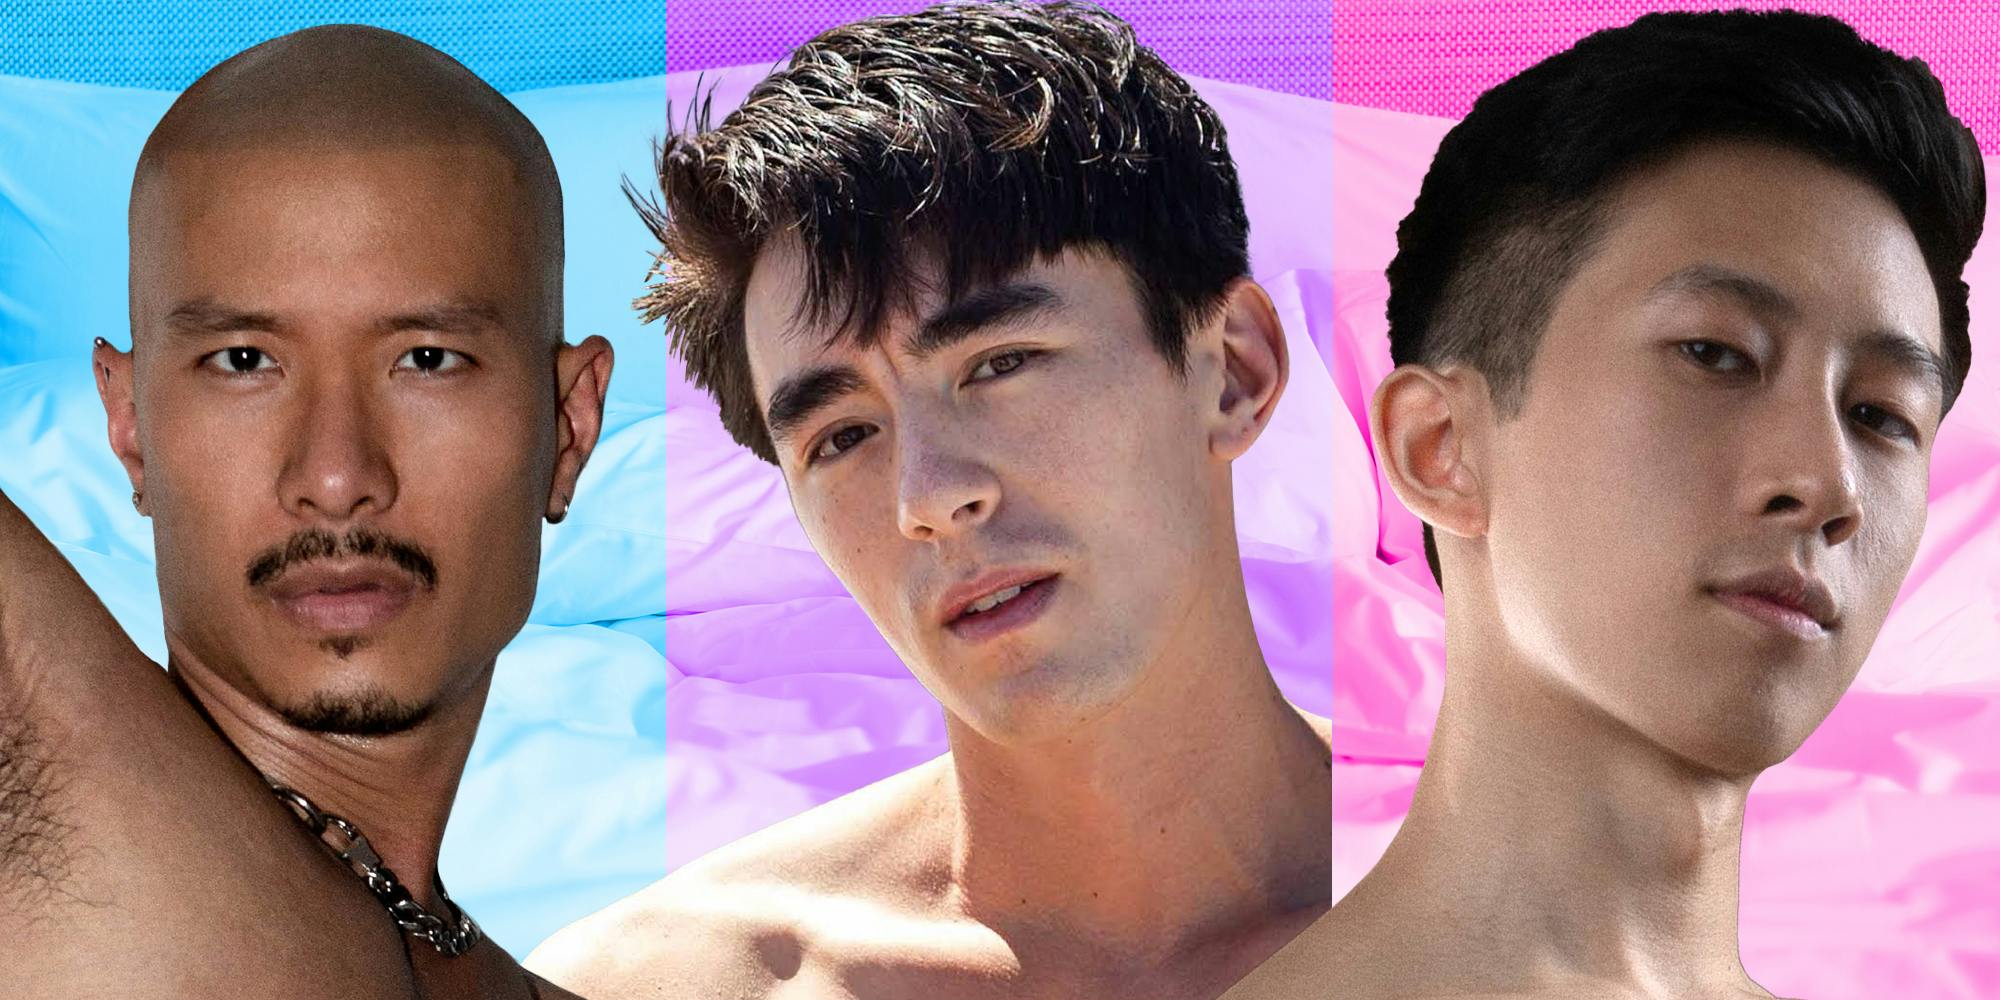 Asian Men Are Marginalized In Porn. Gay Male Performers Are Changing the Narrative